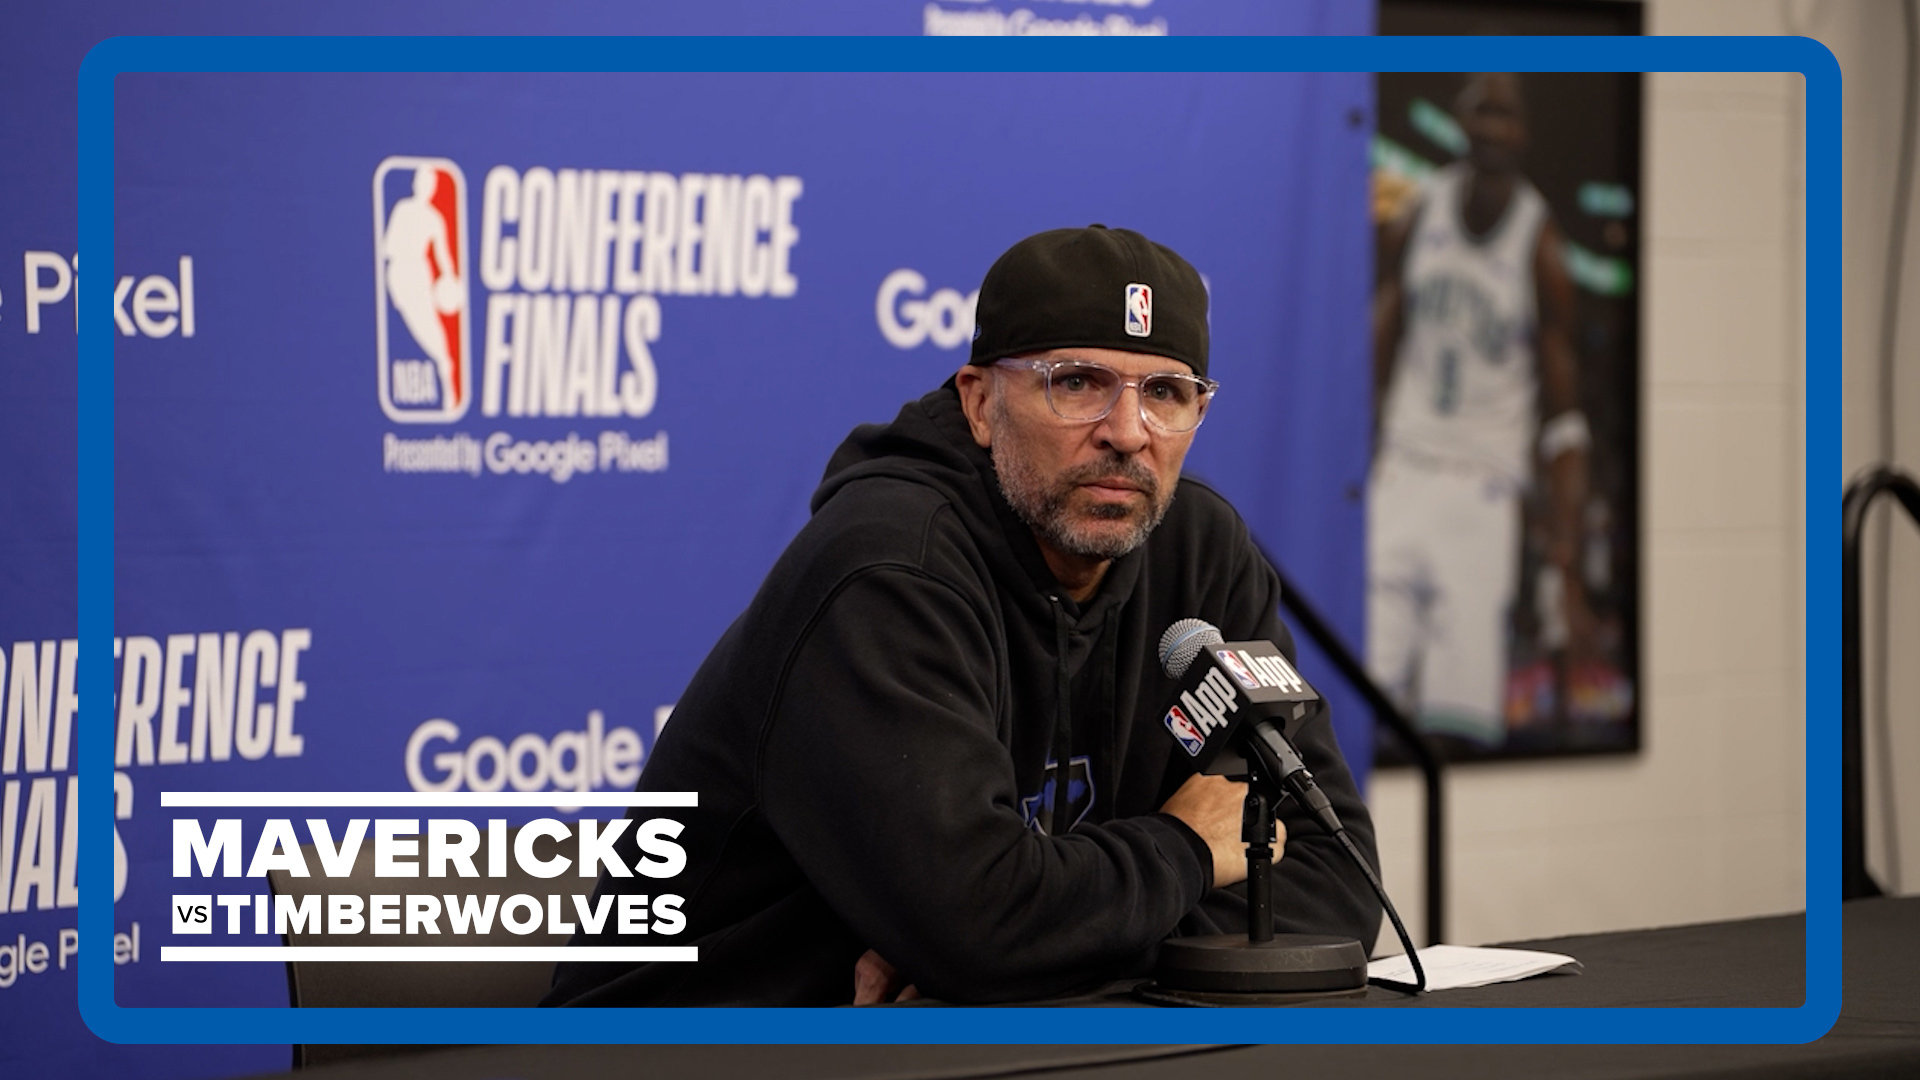 Dallas Mavericks coach Jason Kidd talks before Game 5 of the Western Conference Finals against the Minnesota Timberwolves.